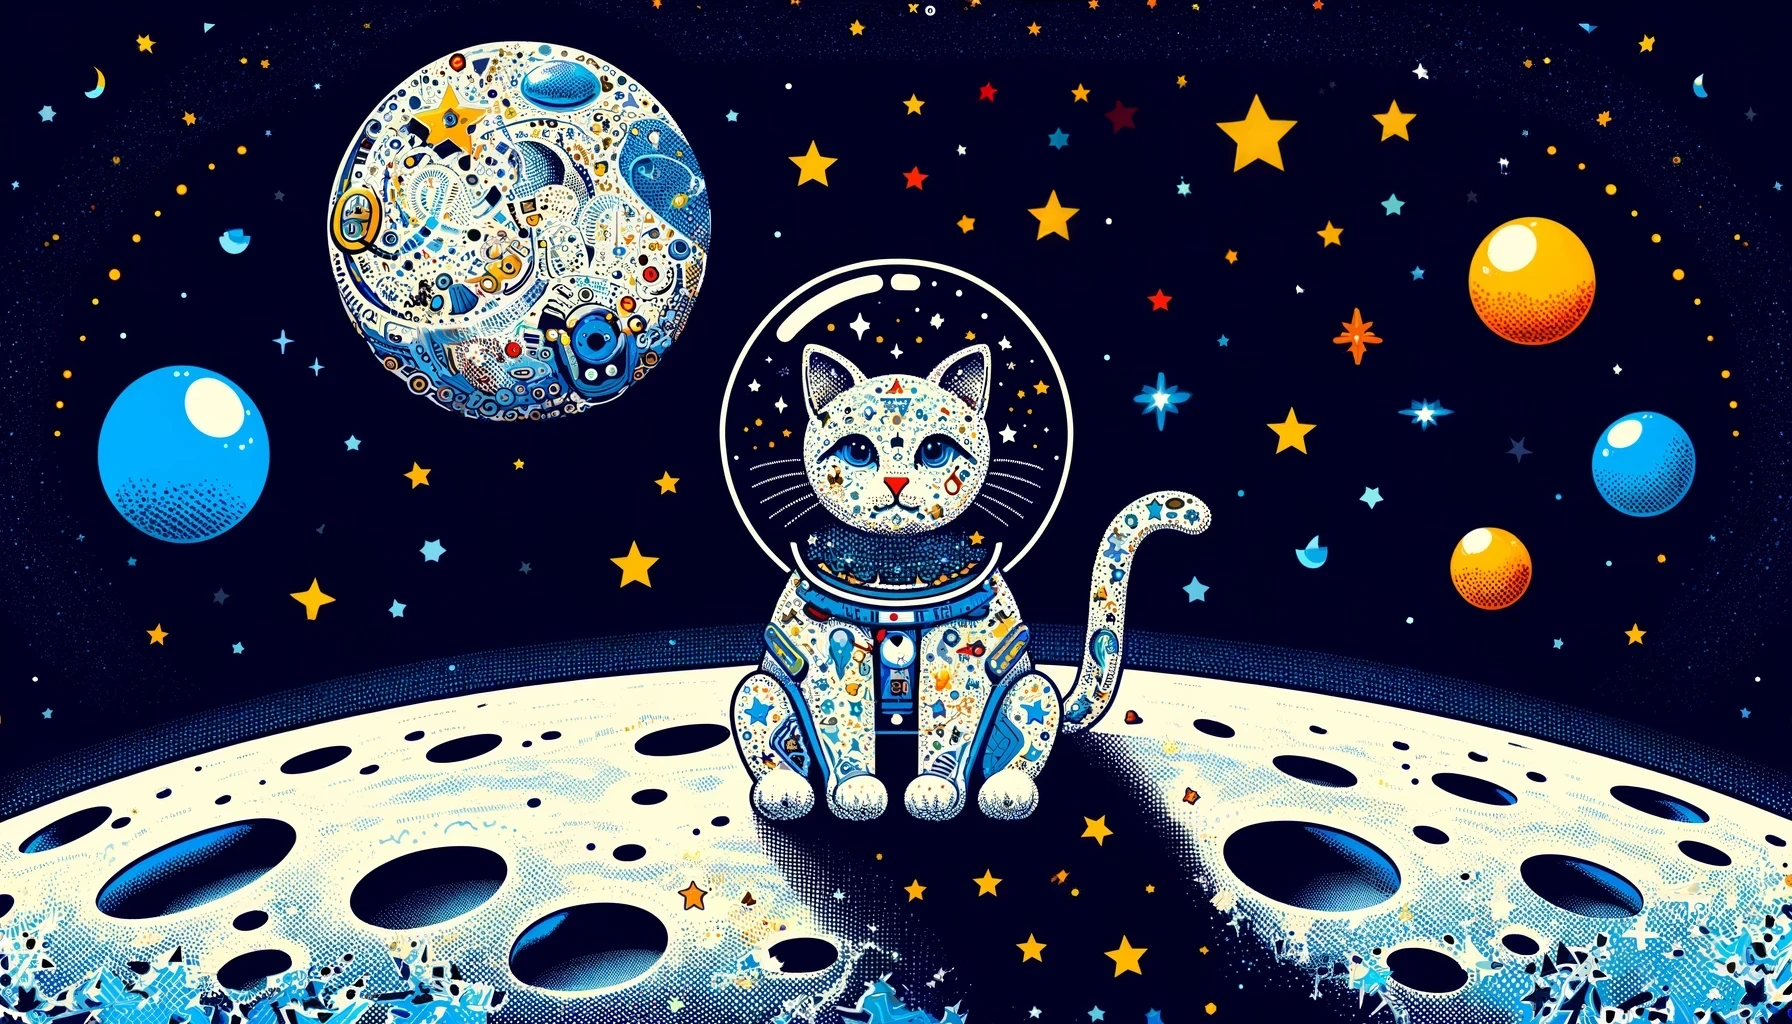 Experts Wary of Google AI’s Misleading ‘Moon Cats’ Responses